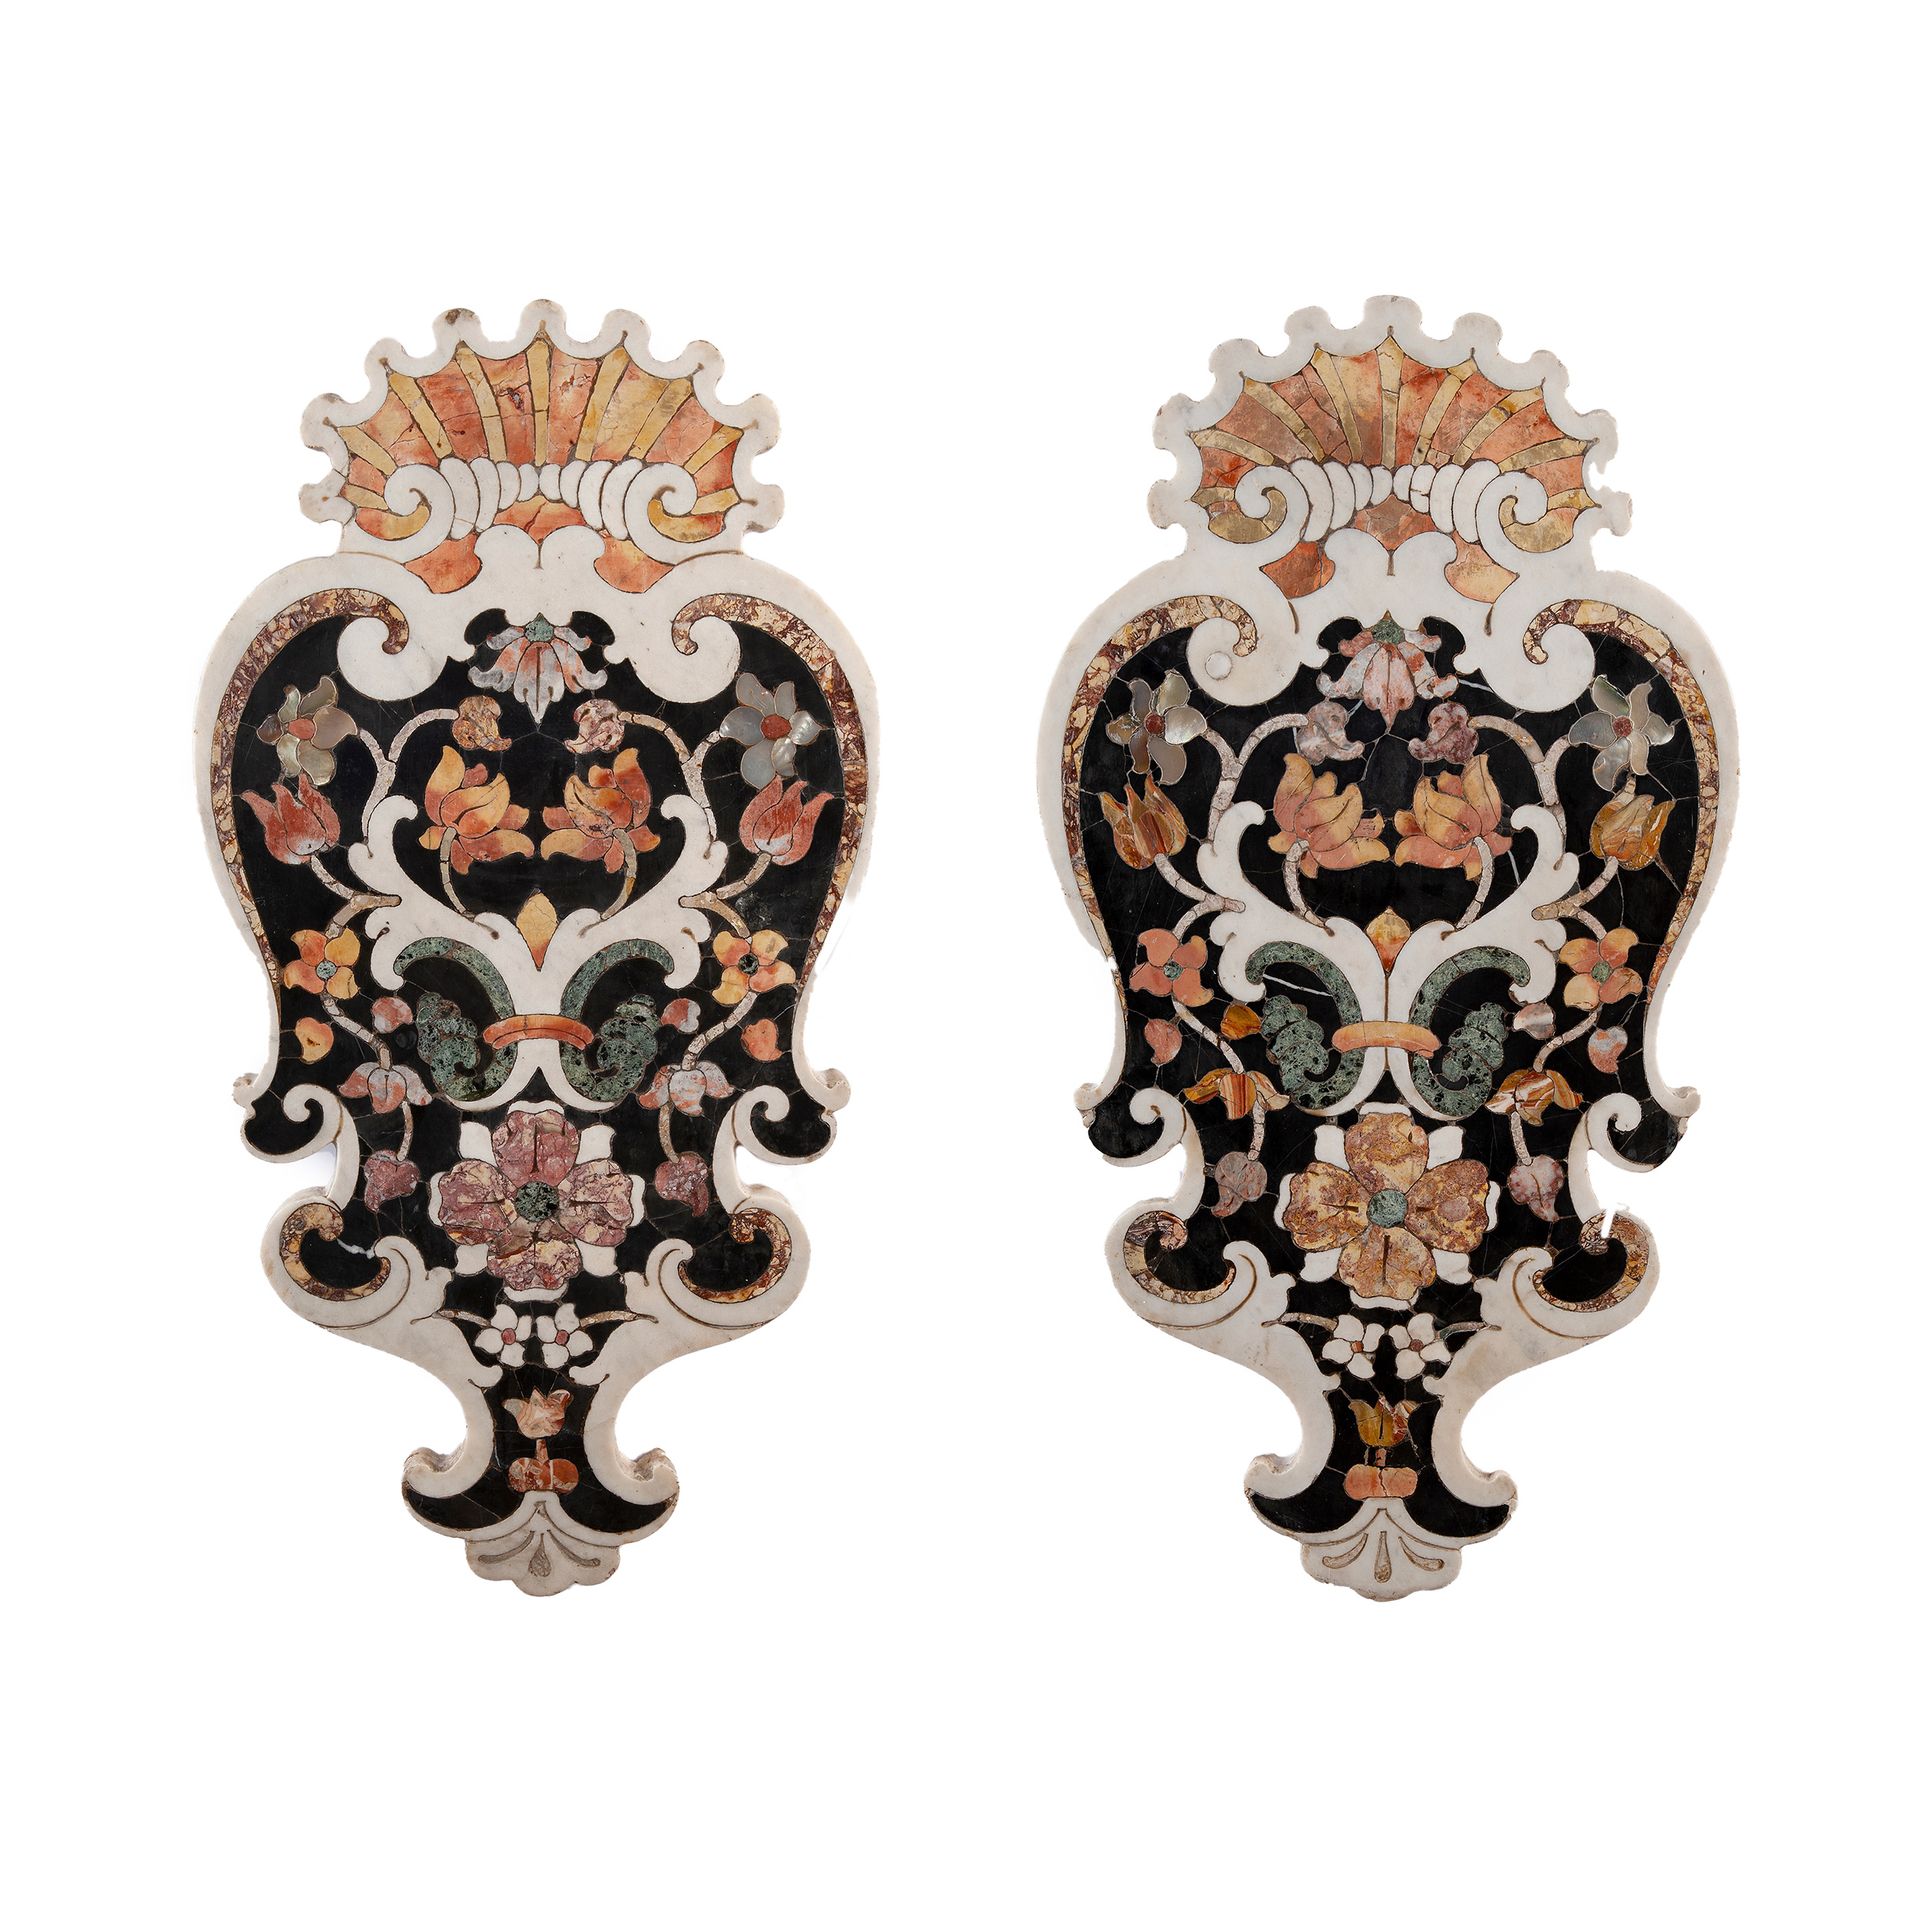 Pair of polychrome marble inlays, Naples 1640 
Probably intended for architectur&hellip;